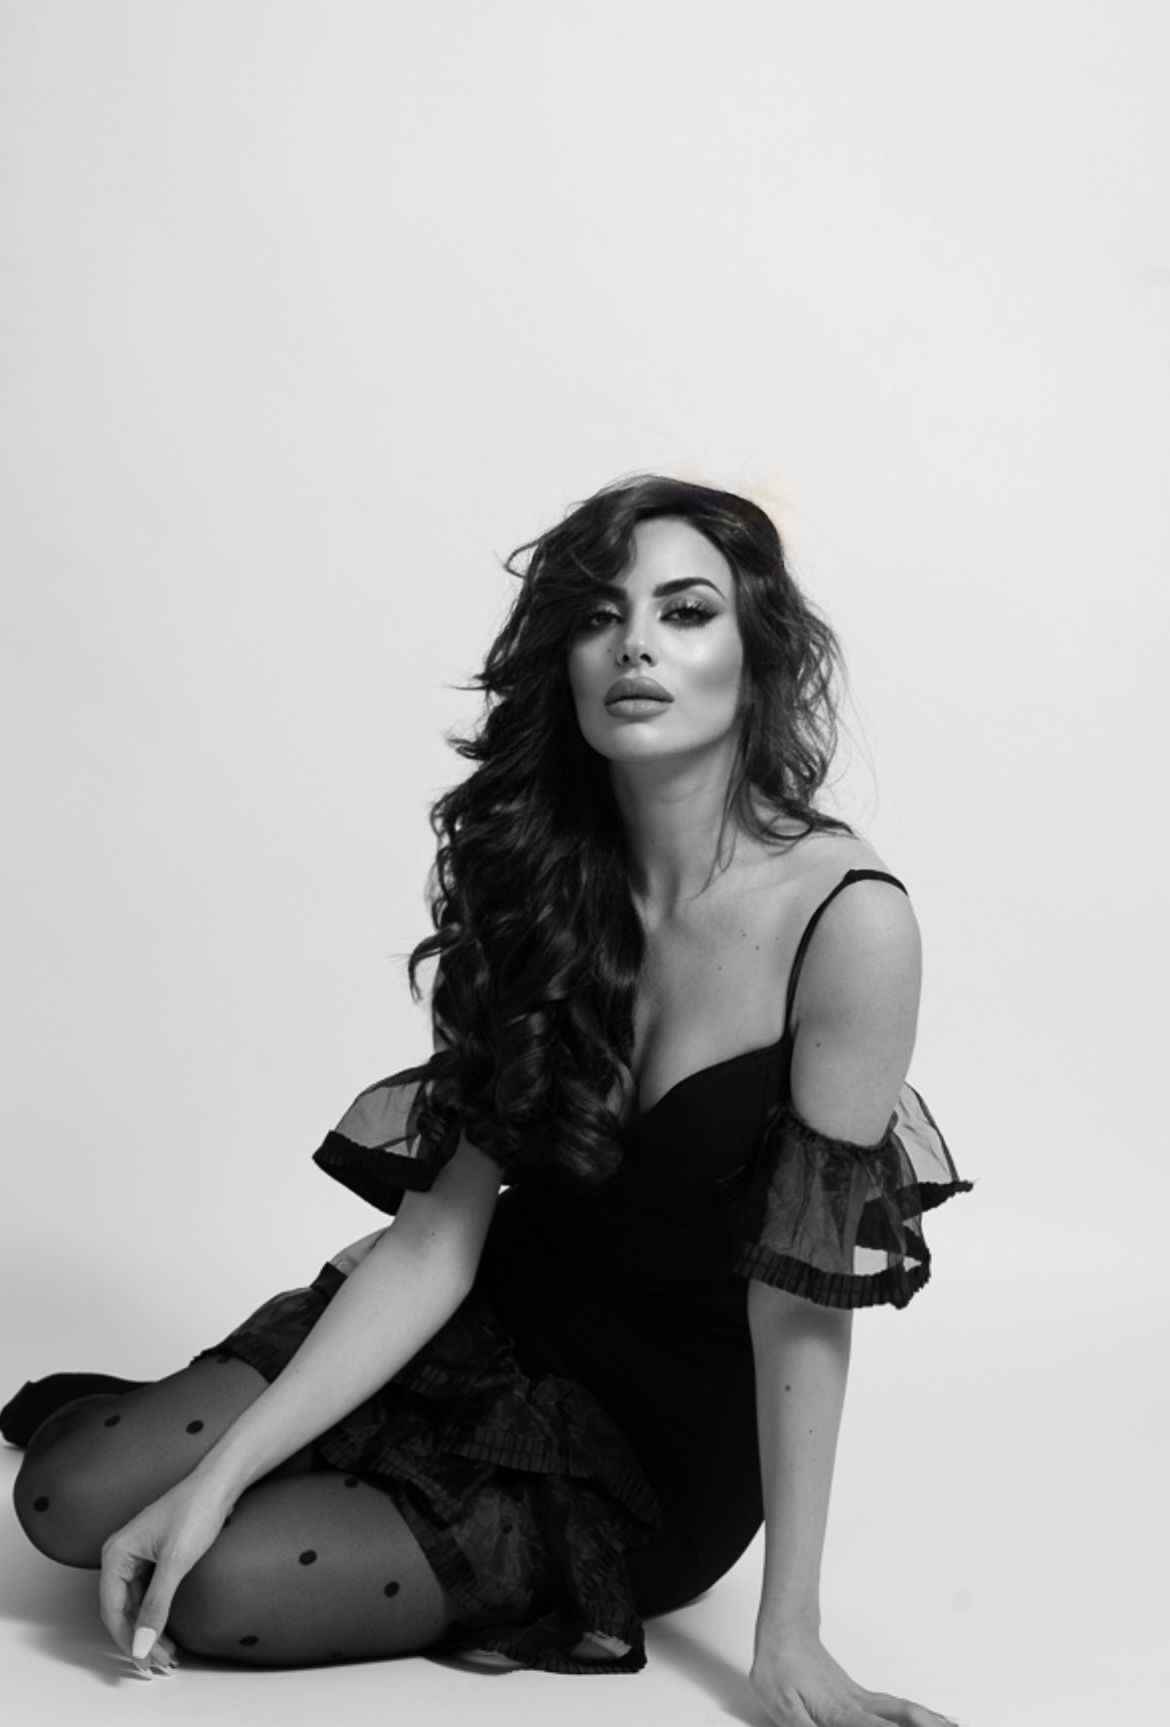 An exclusive interview with top model and Miss Middle East US, Dayane Habchi